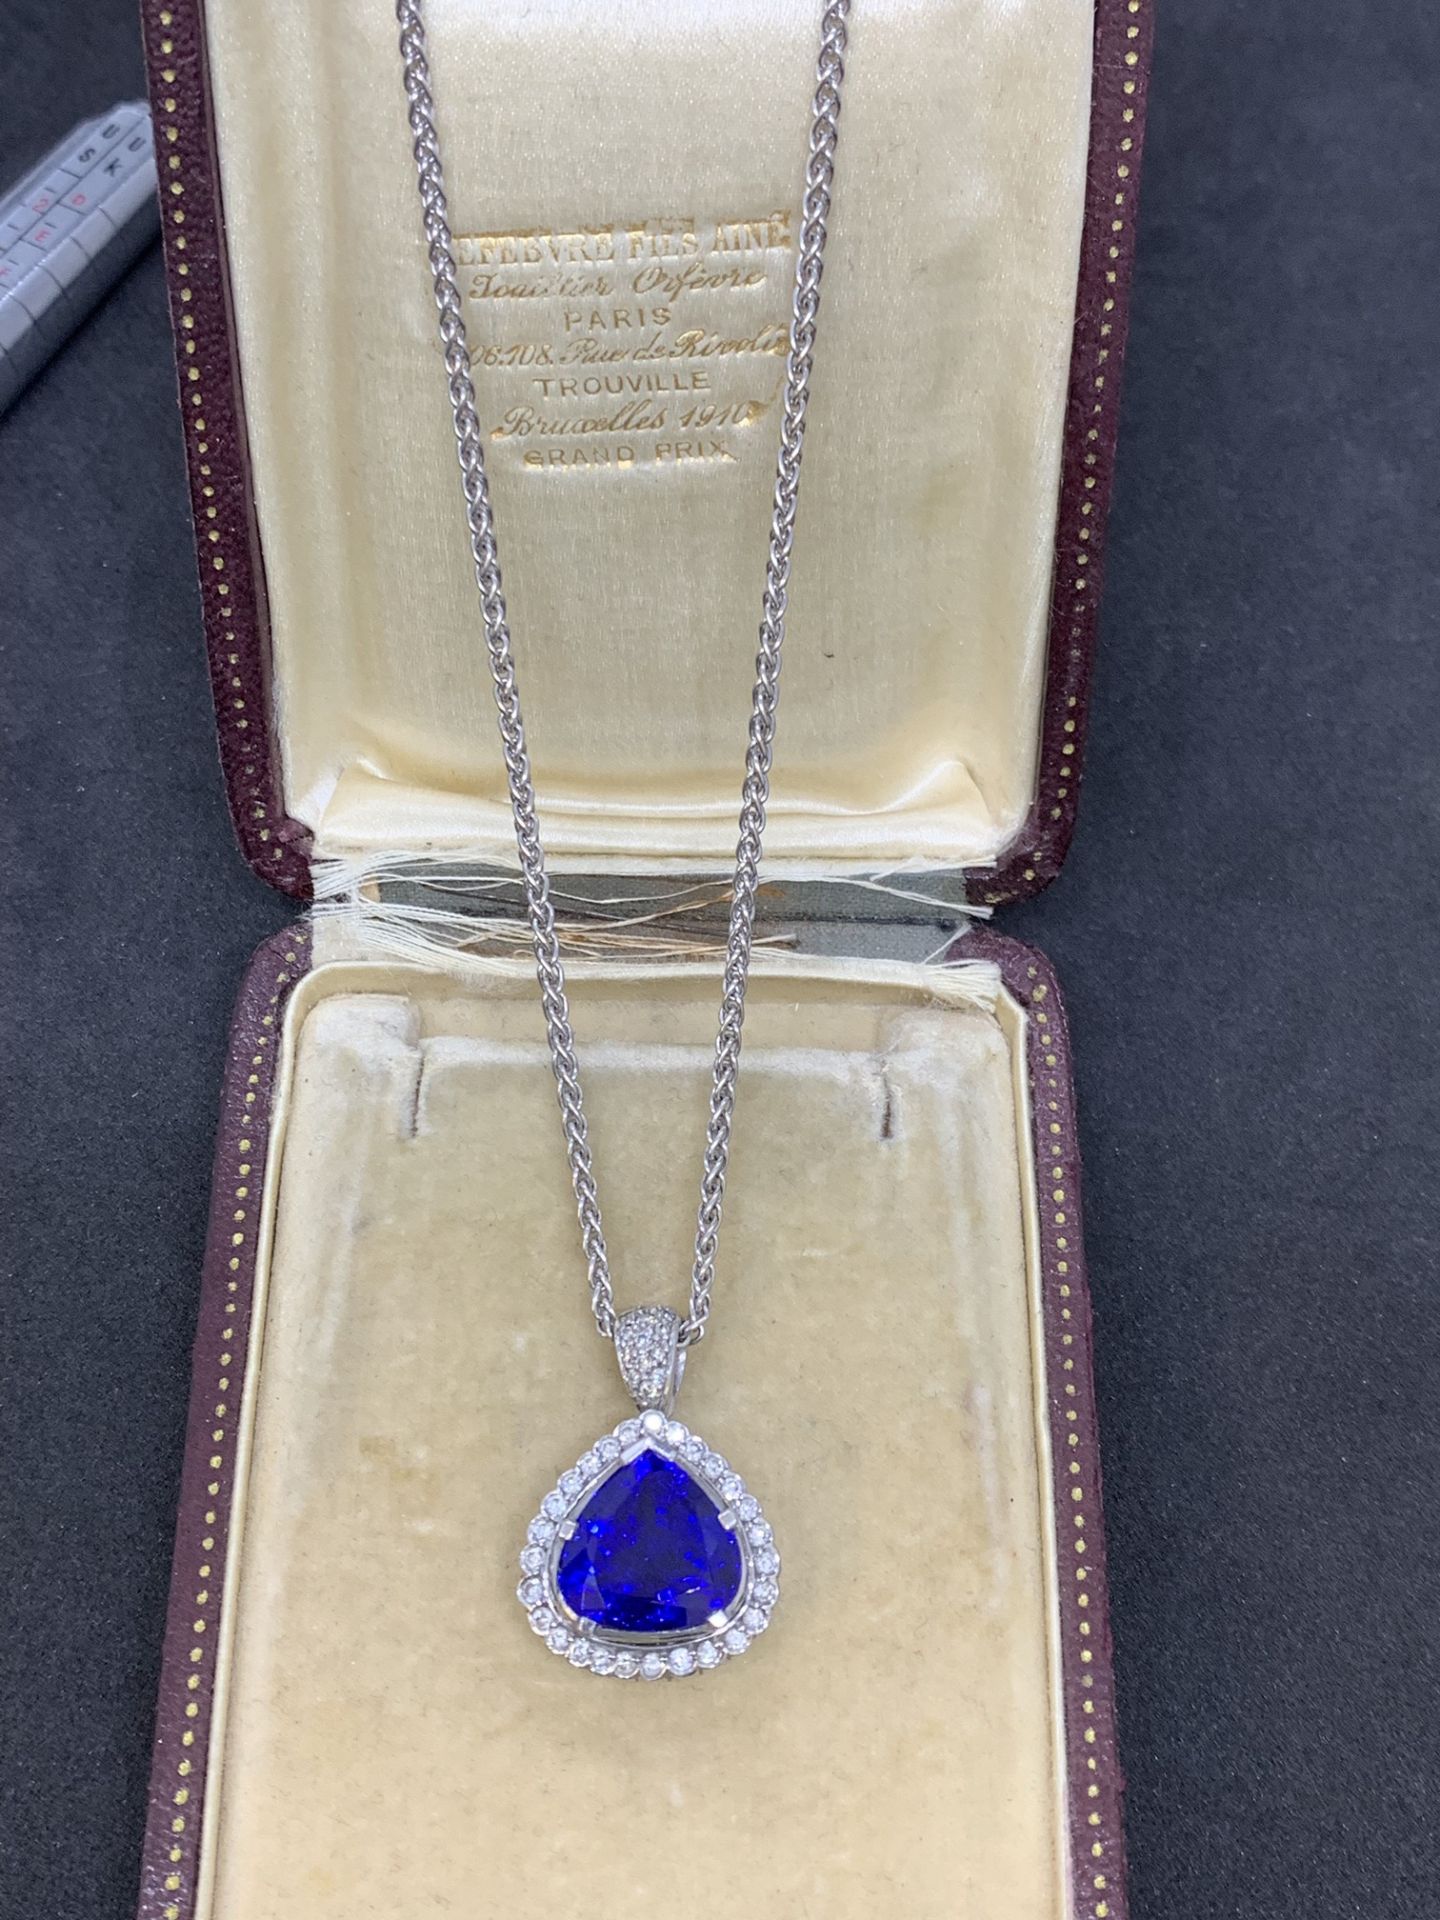 18 carat gold 7ct Tanzanite and one carat diamond heart pendant and chain Approximately 19.4 g - Image 3 of 10